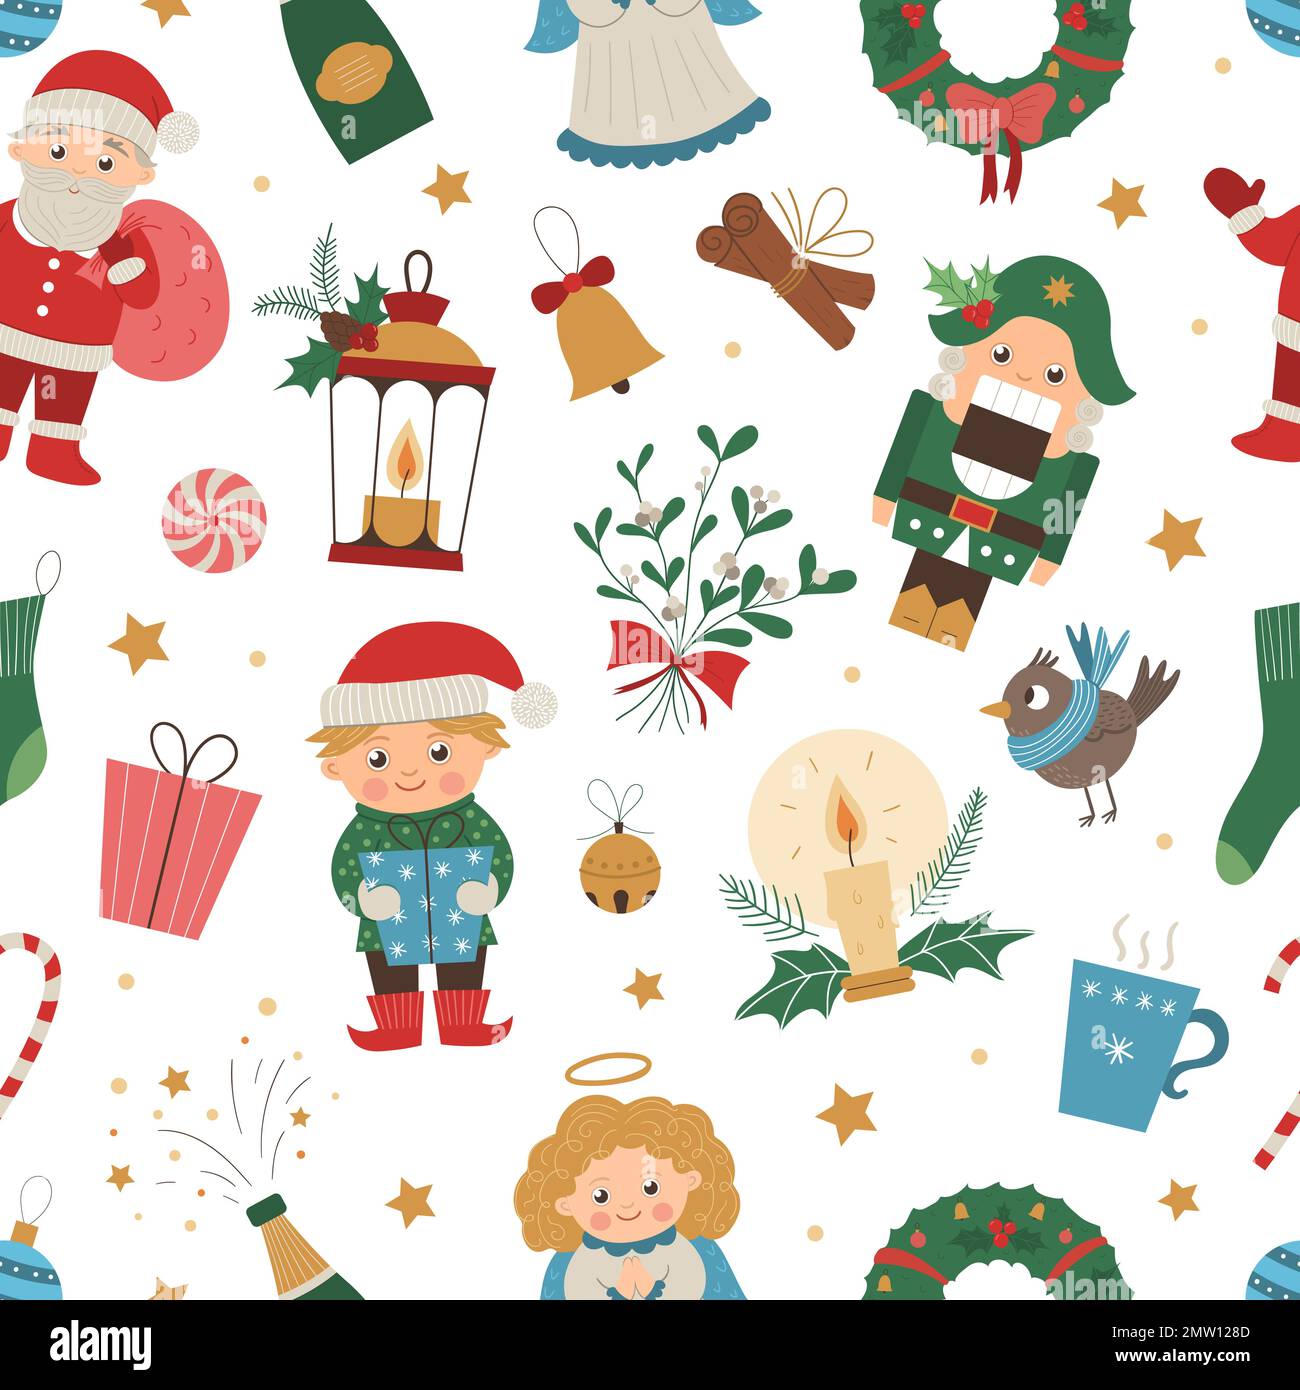 Vector seamless pattern of Christmas elements with Santa Claus, Angel, Nutcracker, Elf. Cute funny repeat background of new year symbols. Christmas fl Stock Vector